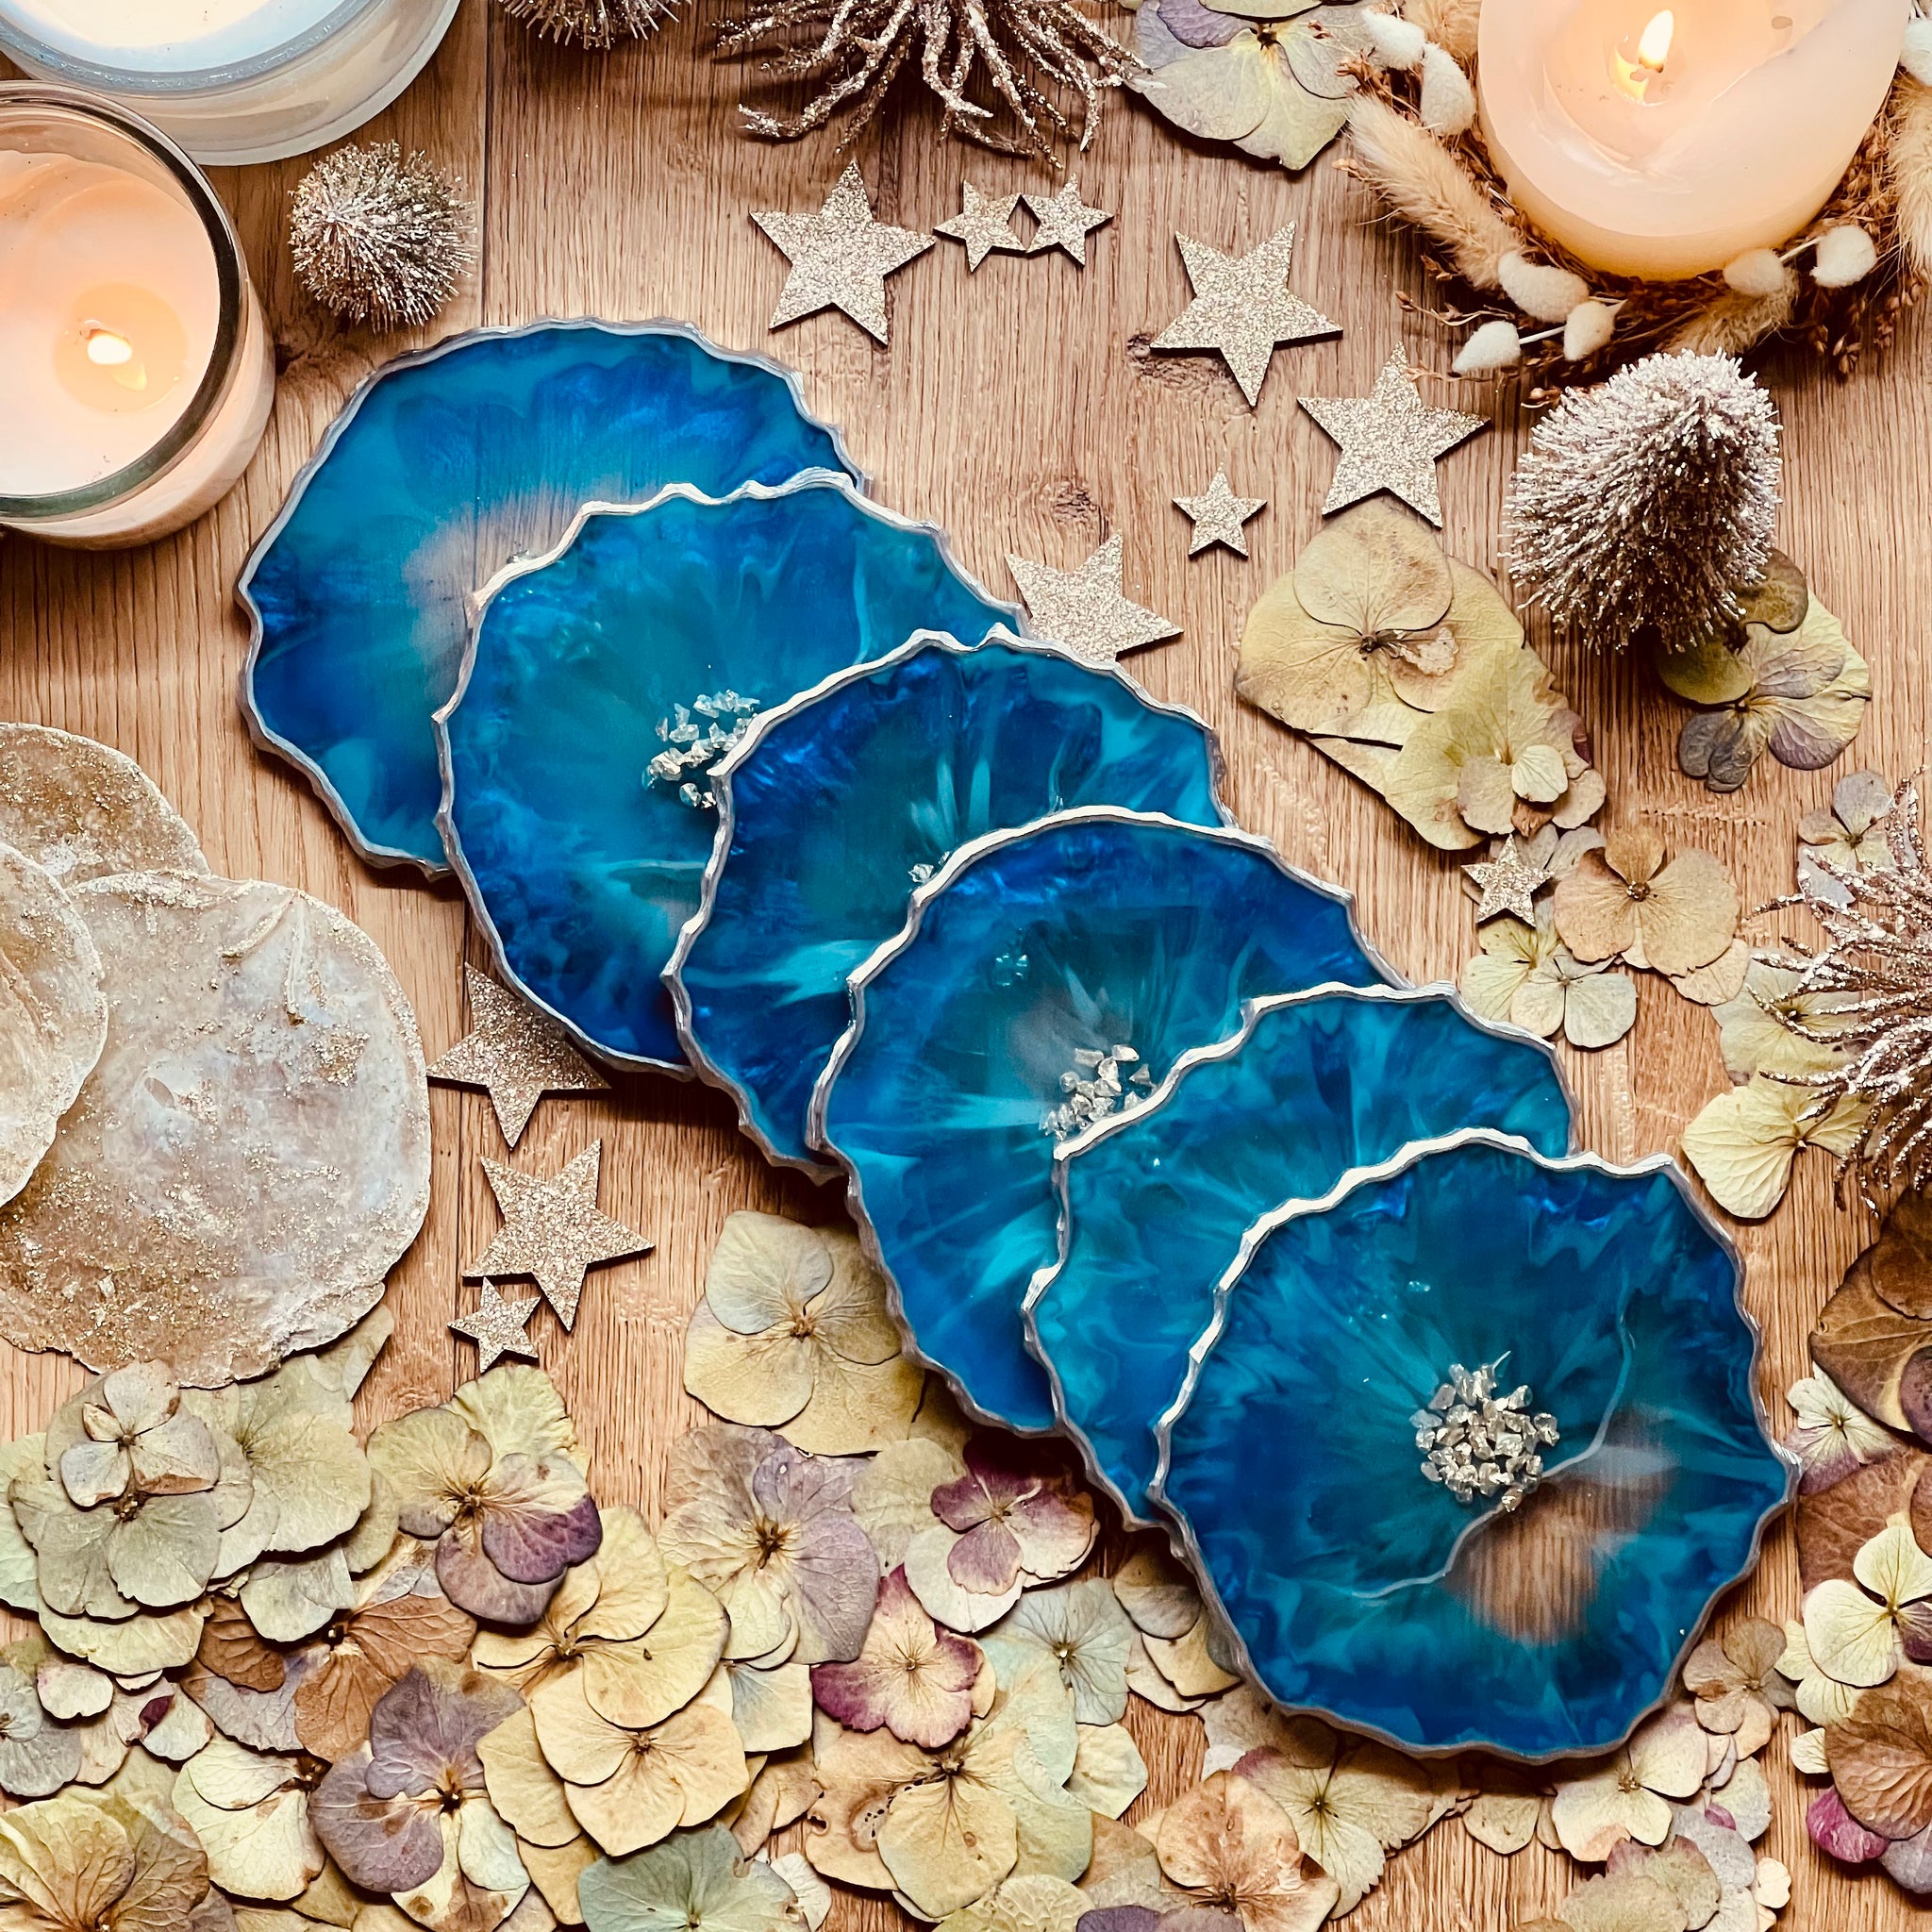 6 resin coasters in blue with silver